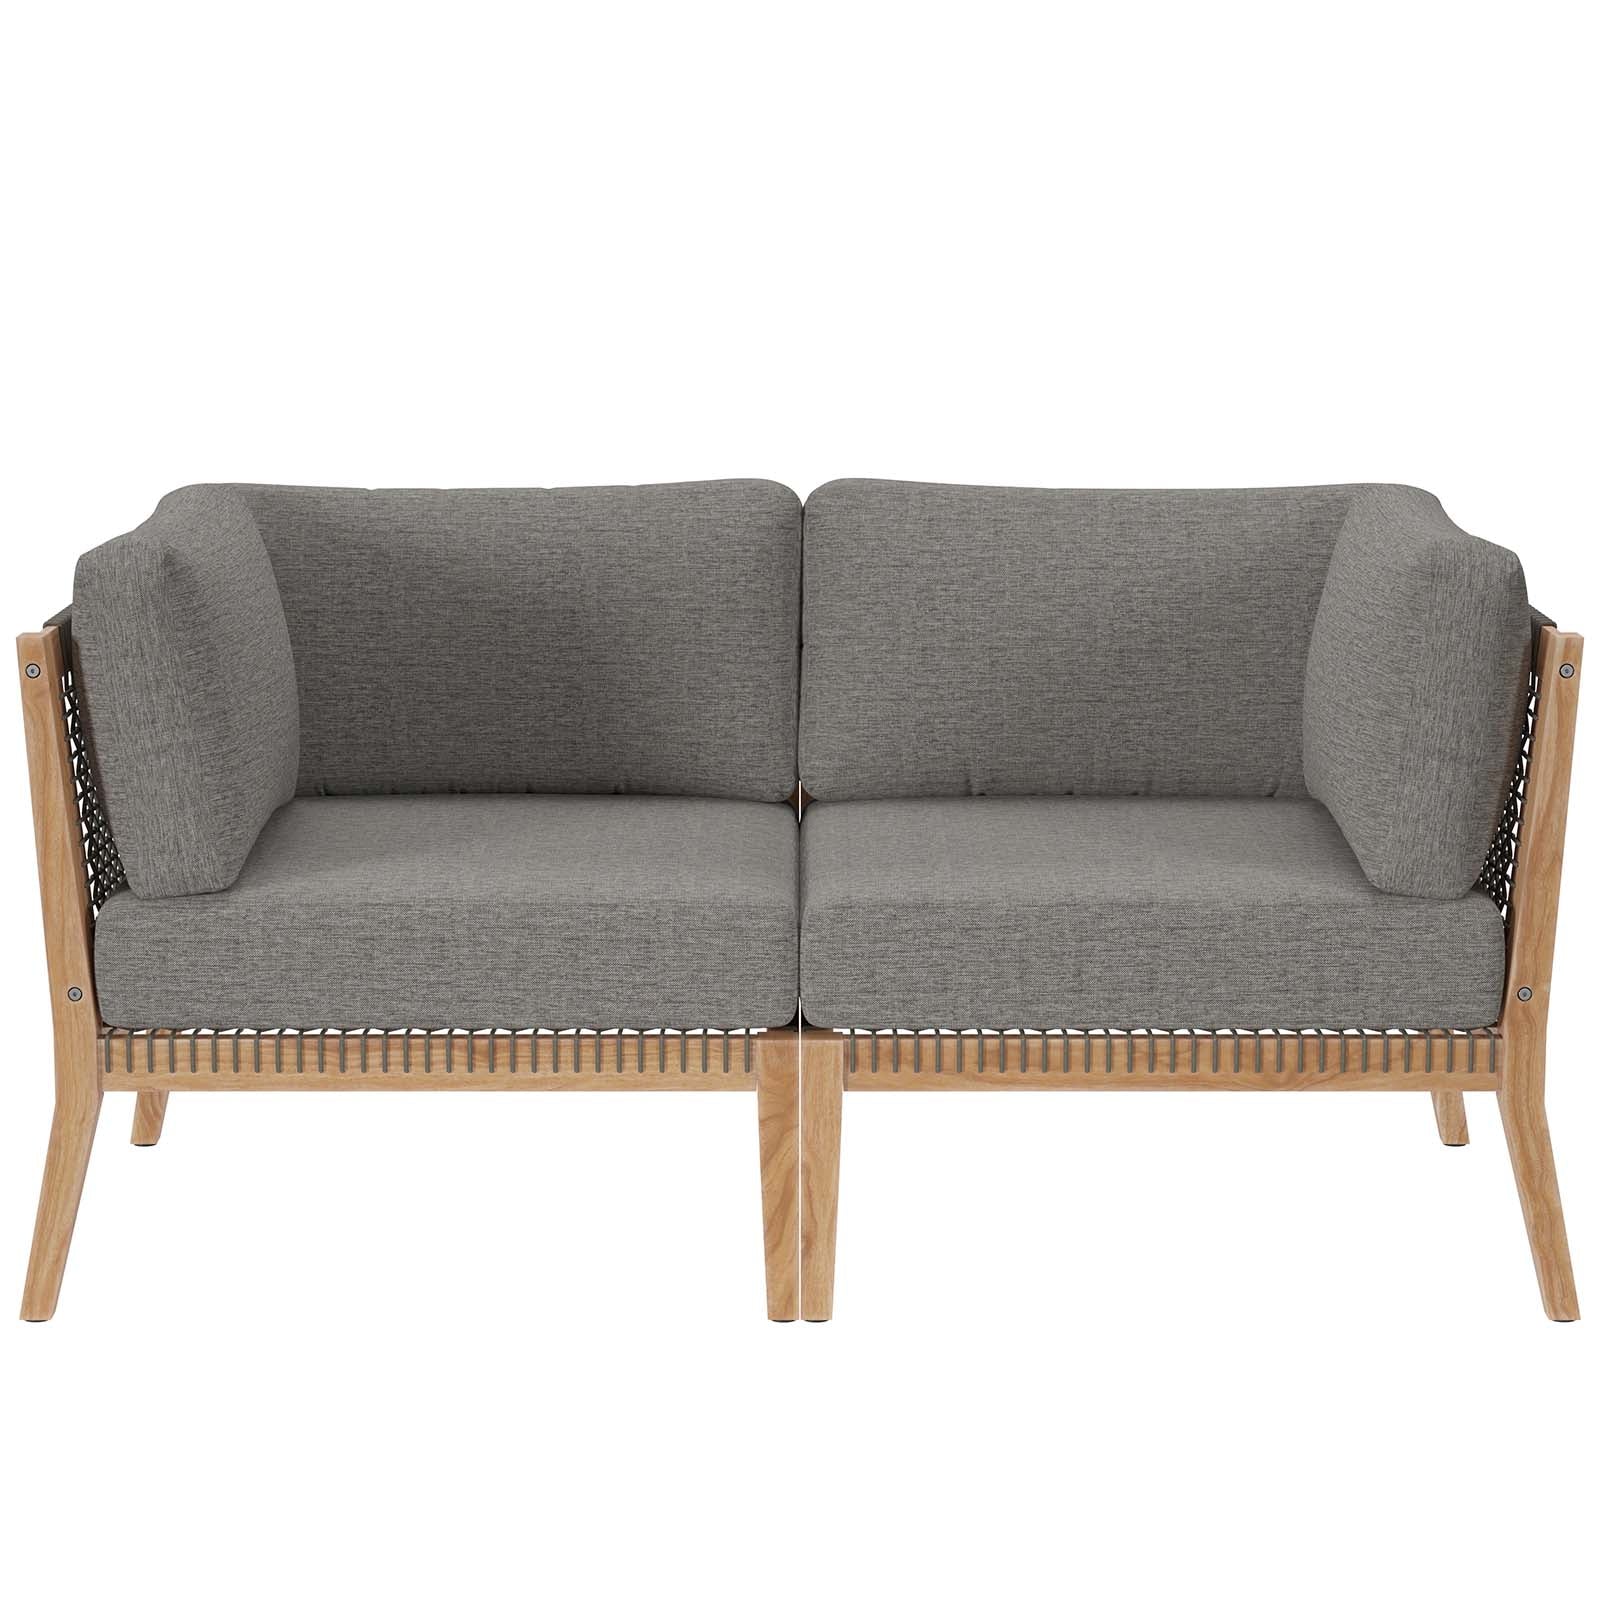 Modway Outdoor Sofas - Clearwater-Outdoor-Patio-Teak-Wood-Loveseat-Gray-Graphite